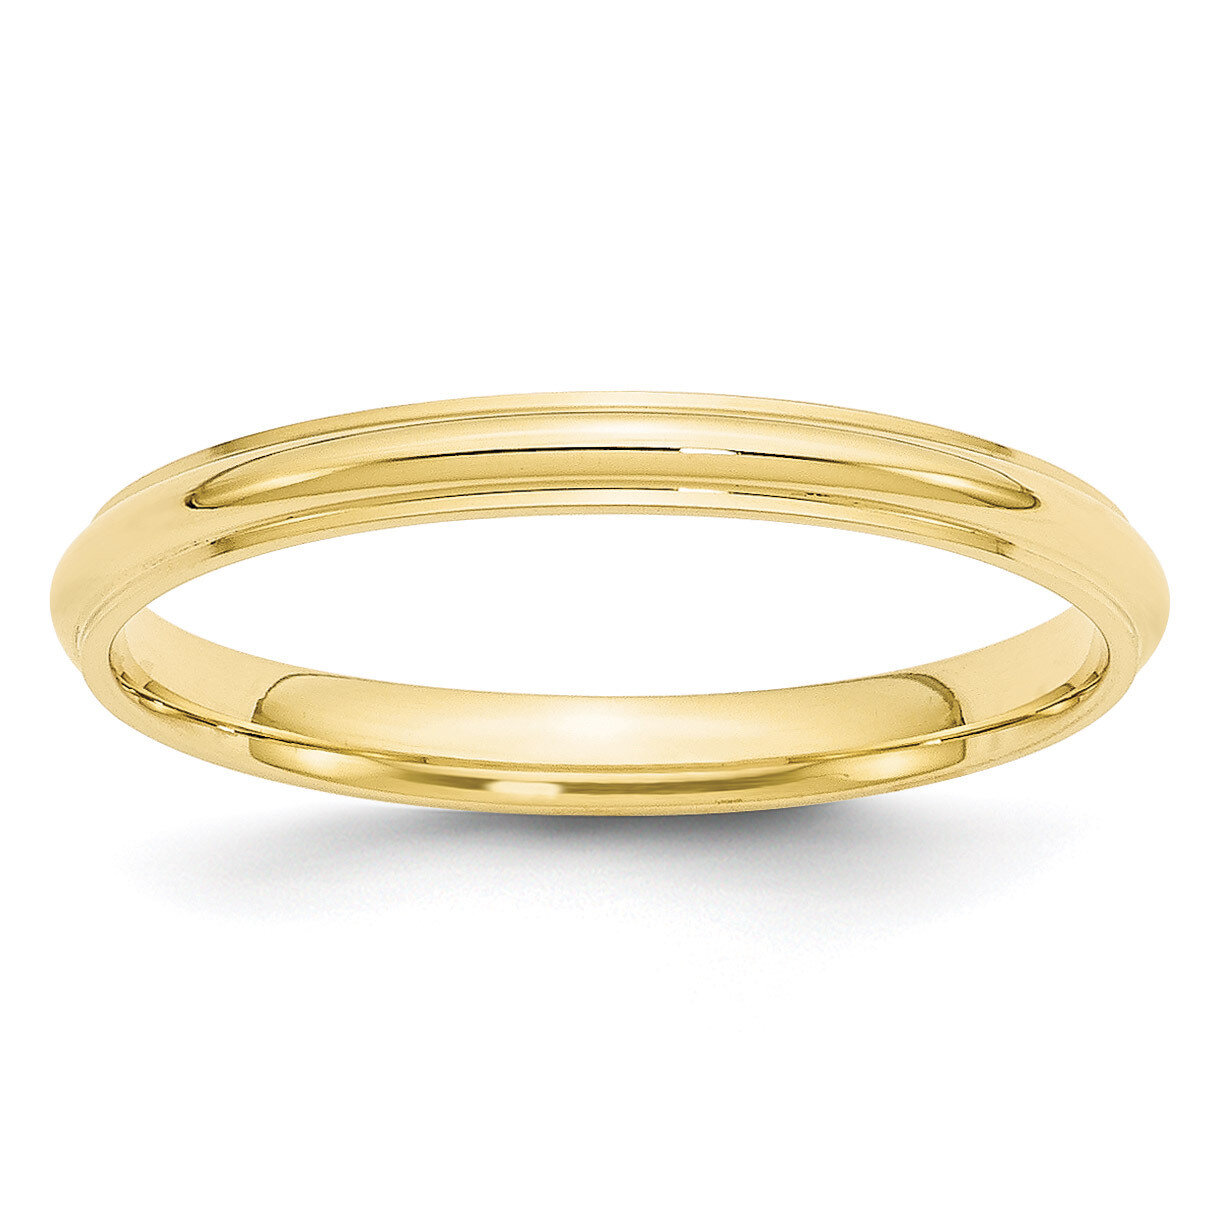 2.5mm Half Round with Edge Band 10k Yellow Gold Engravable 1HRE025-10